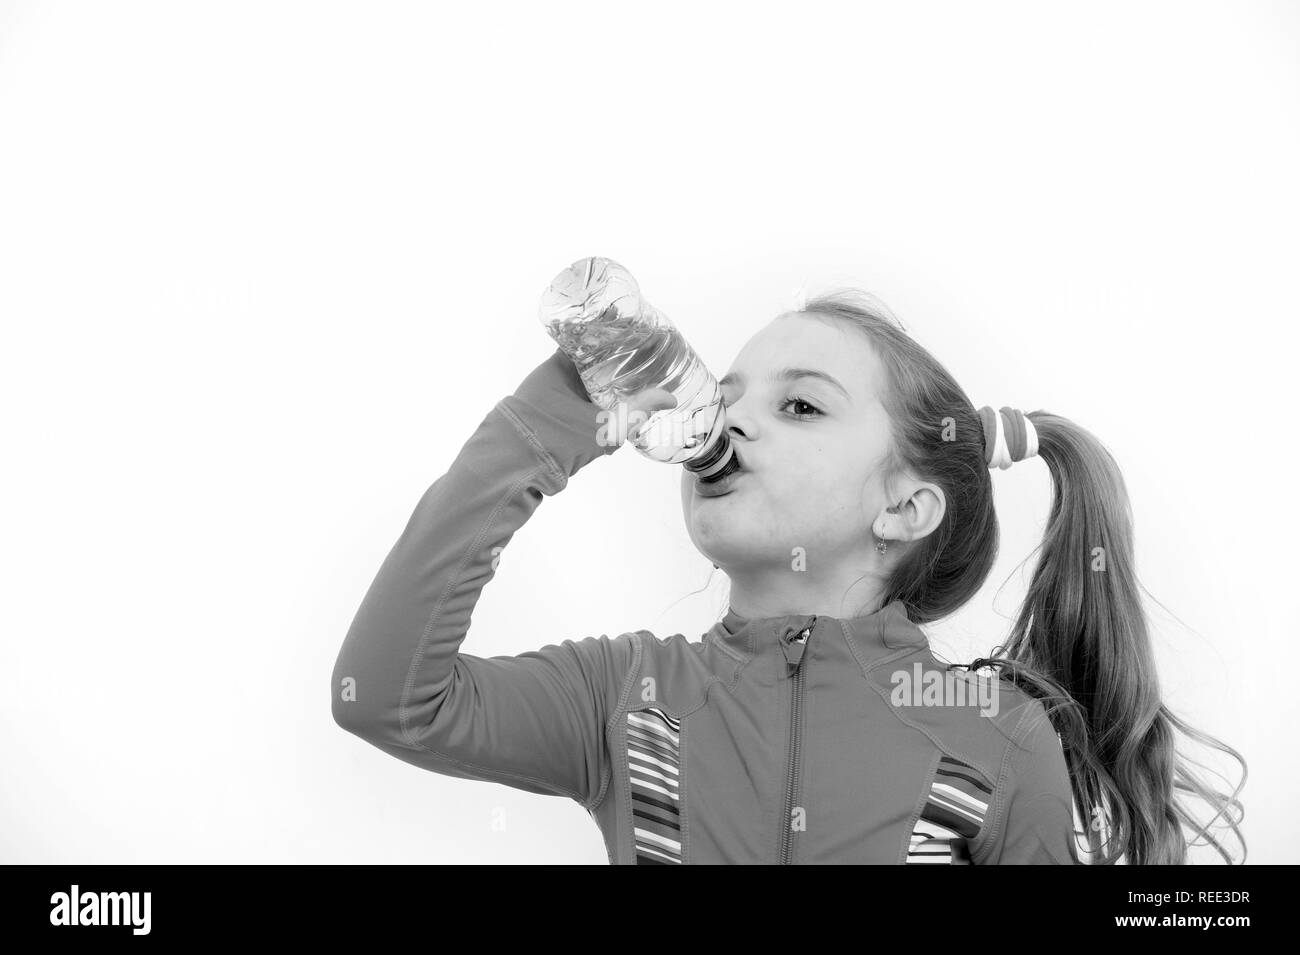 Fluid balance, hydration. Child feel thirsty in pink suit isolated on white. Health and healthy drinking. Girl drink water from bottle. Dehydration, thirst concept. Stock Photo